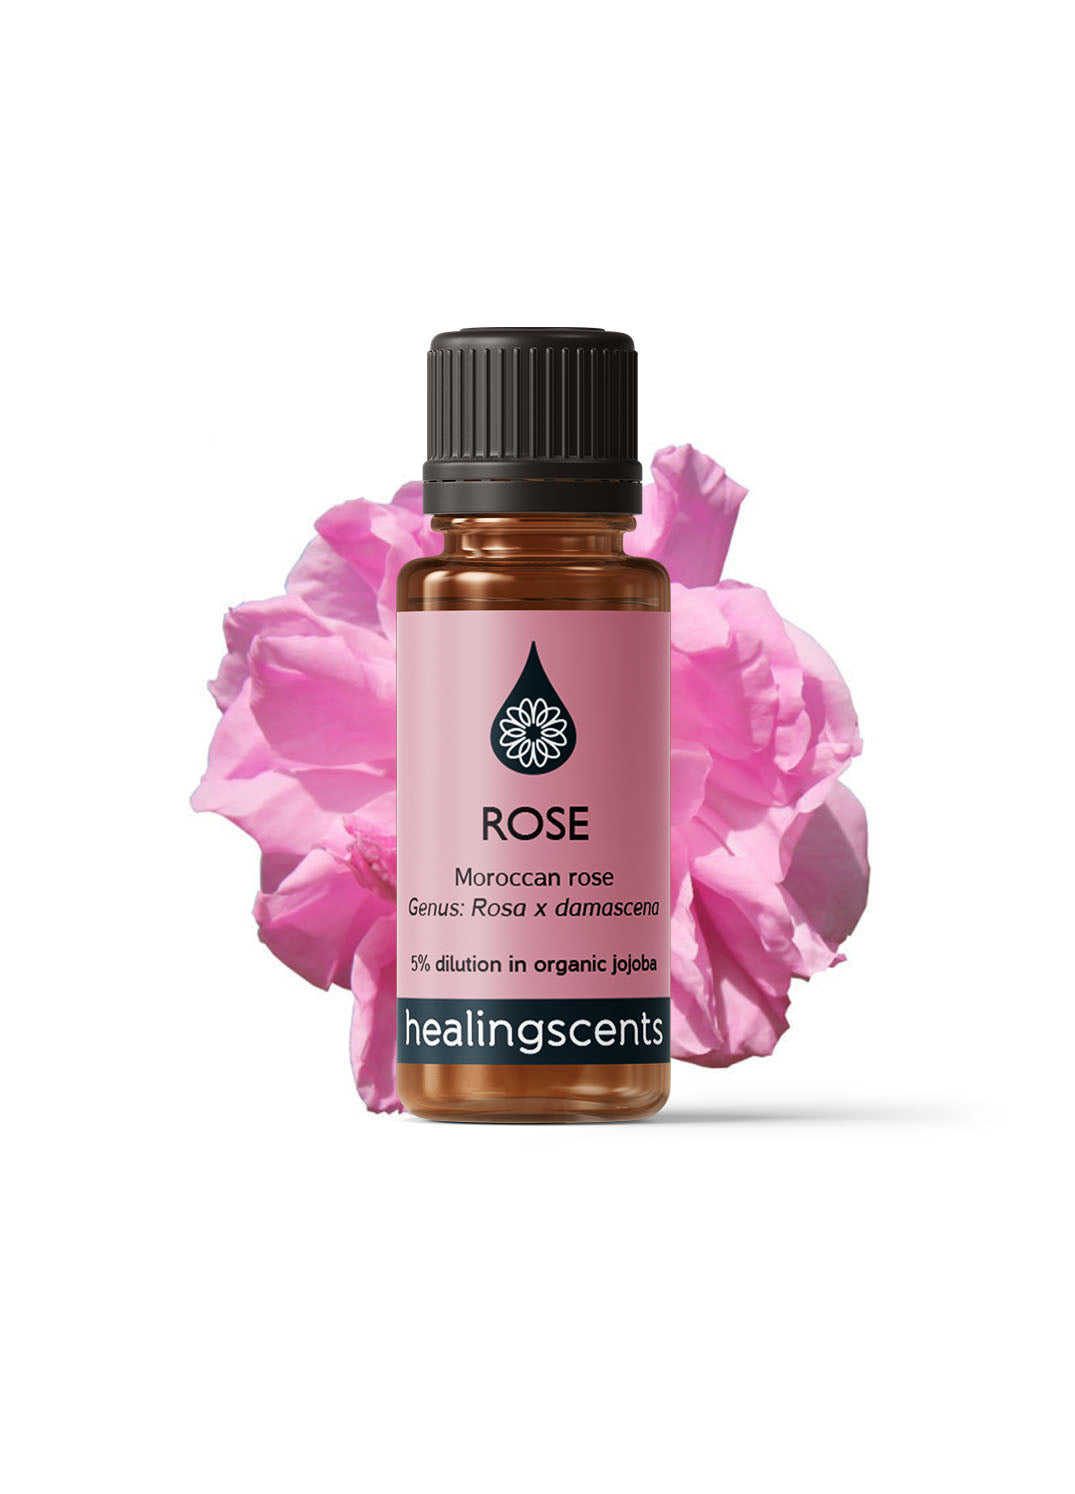 Rose Absolute (Morocco) Absolute Healingscents   